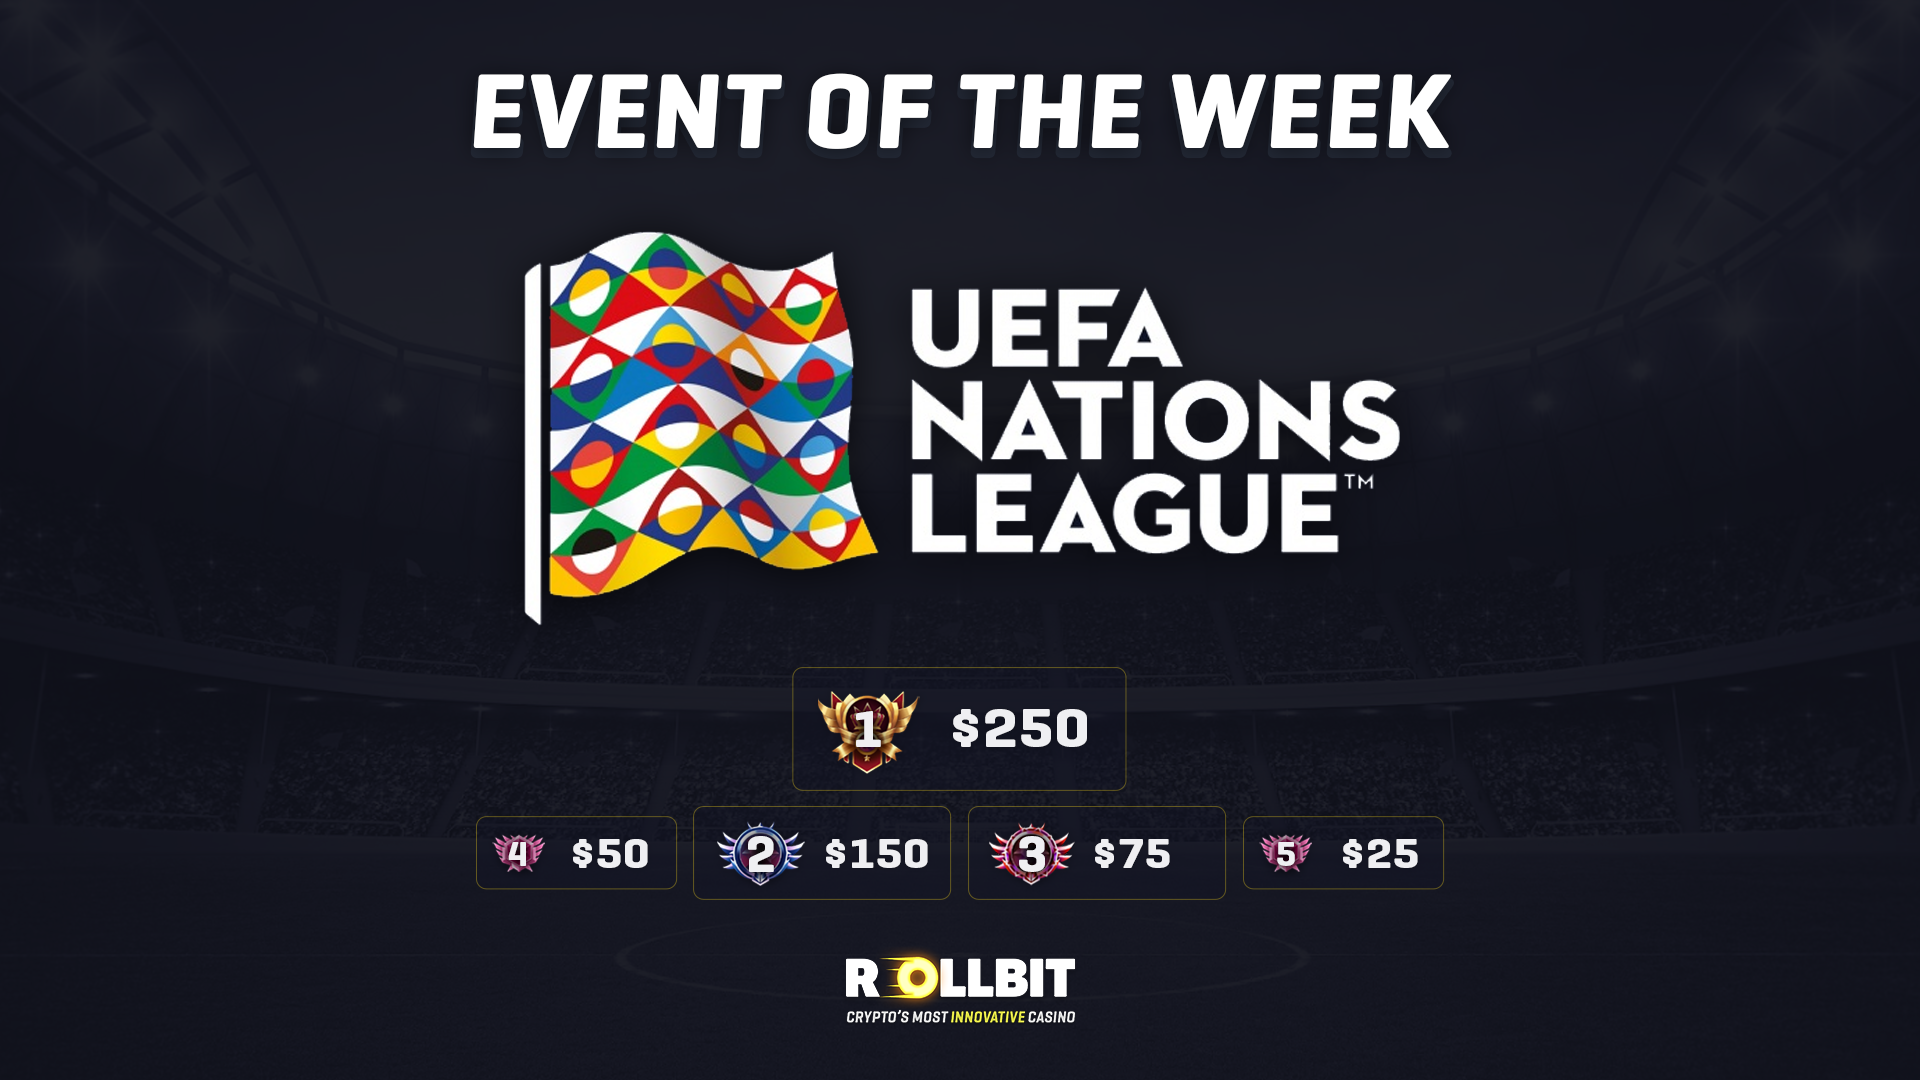 The UEFA Nations League Sports Event of the Week ⚽